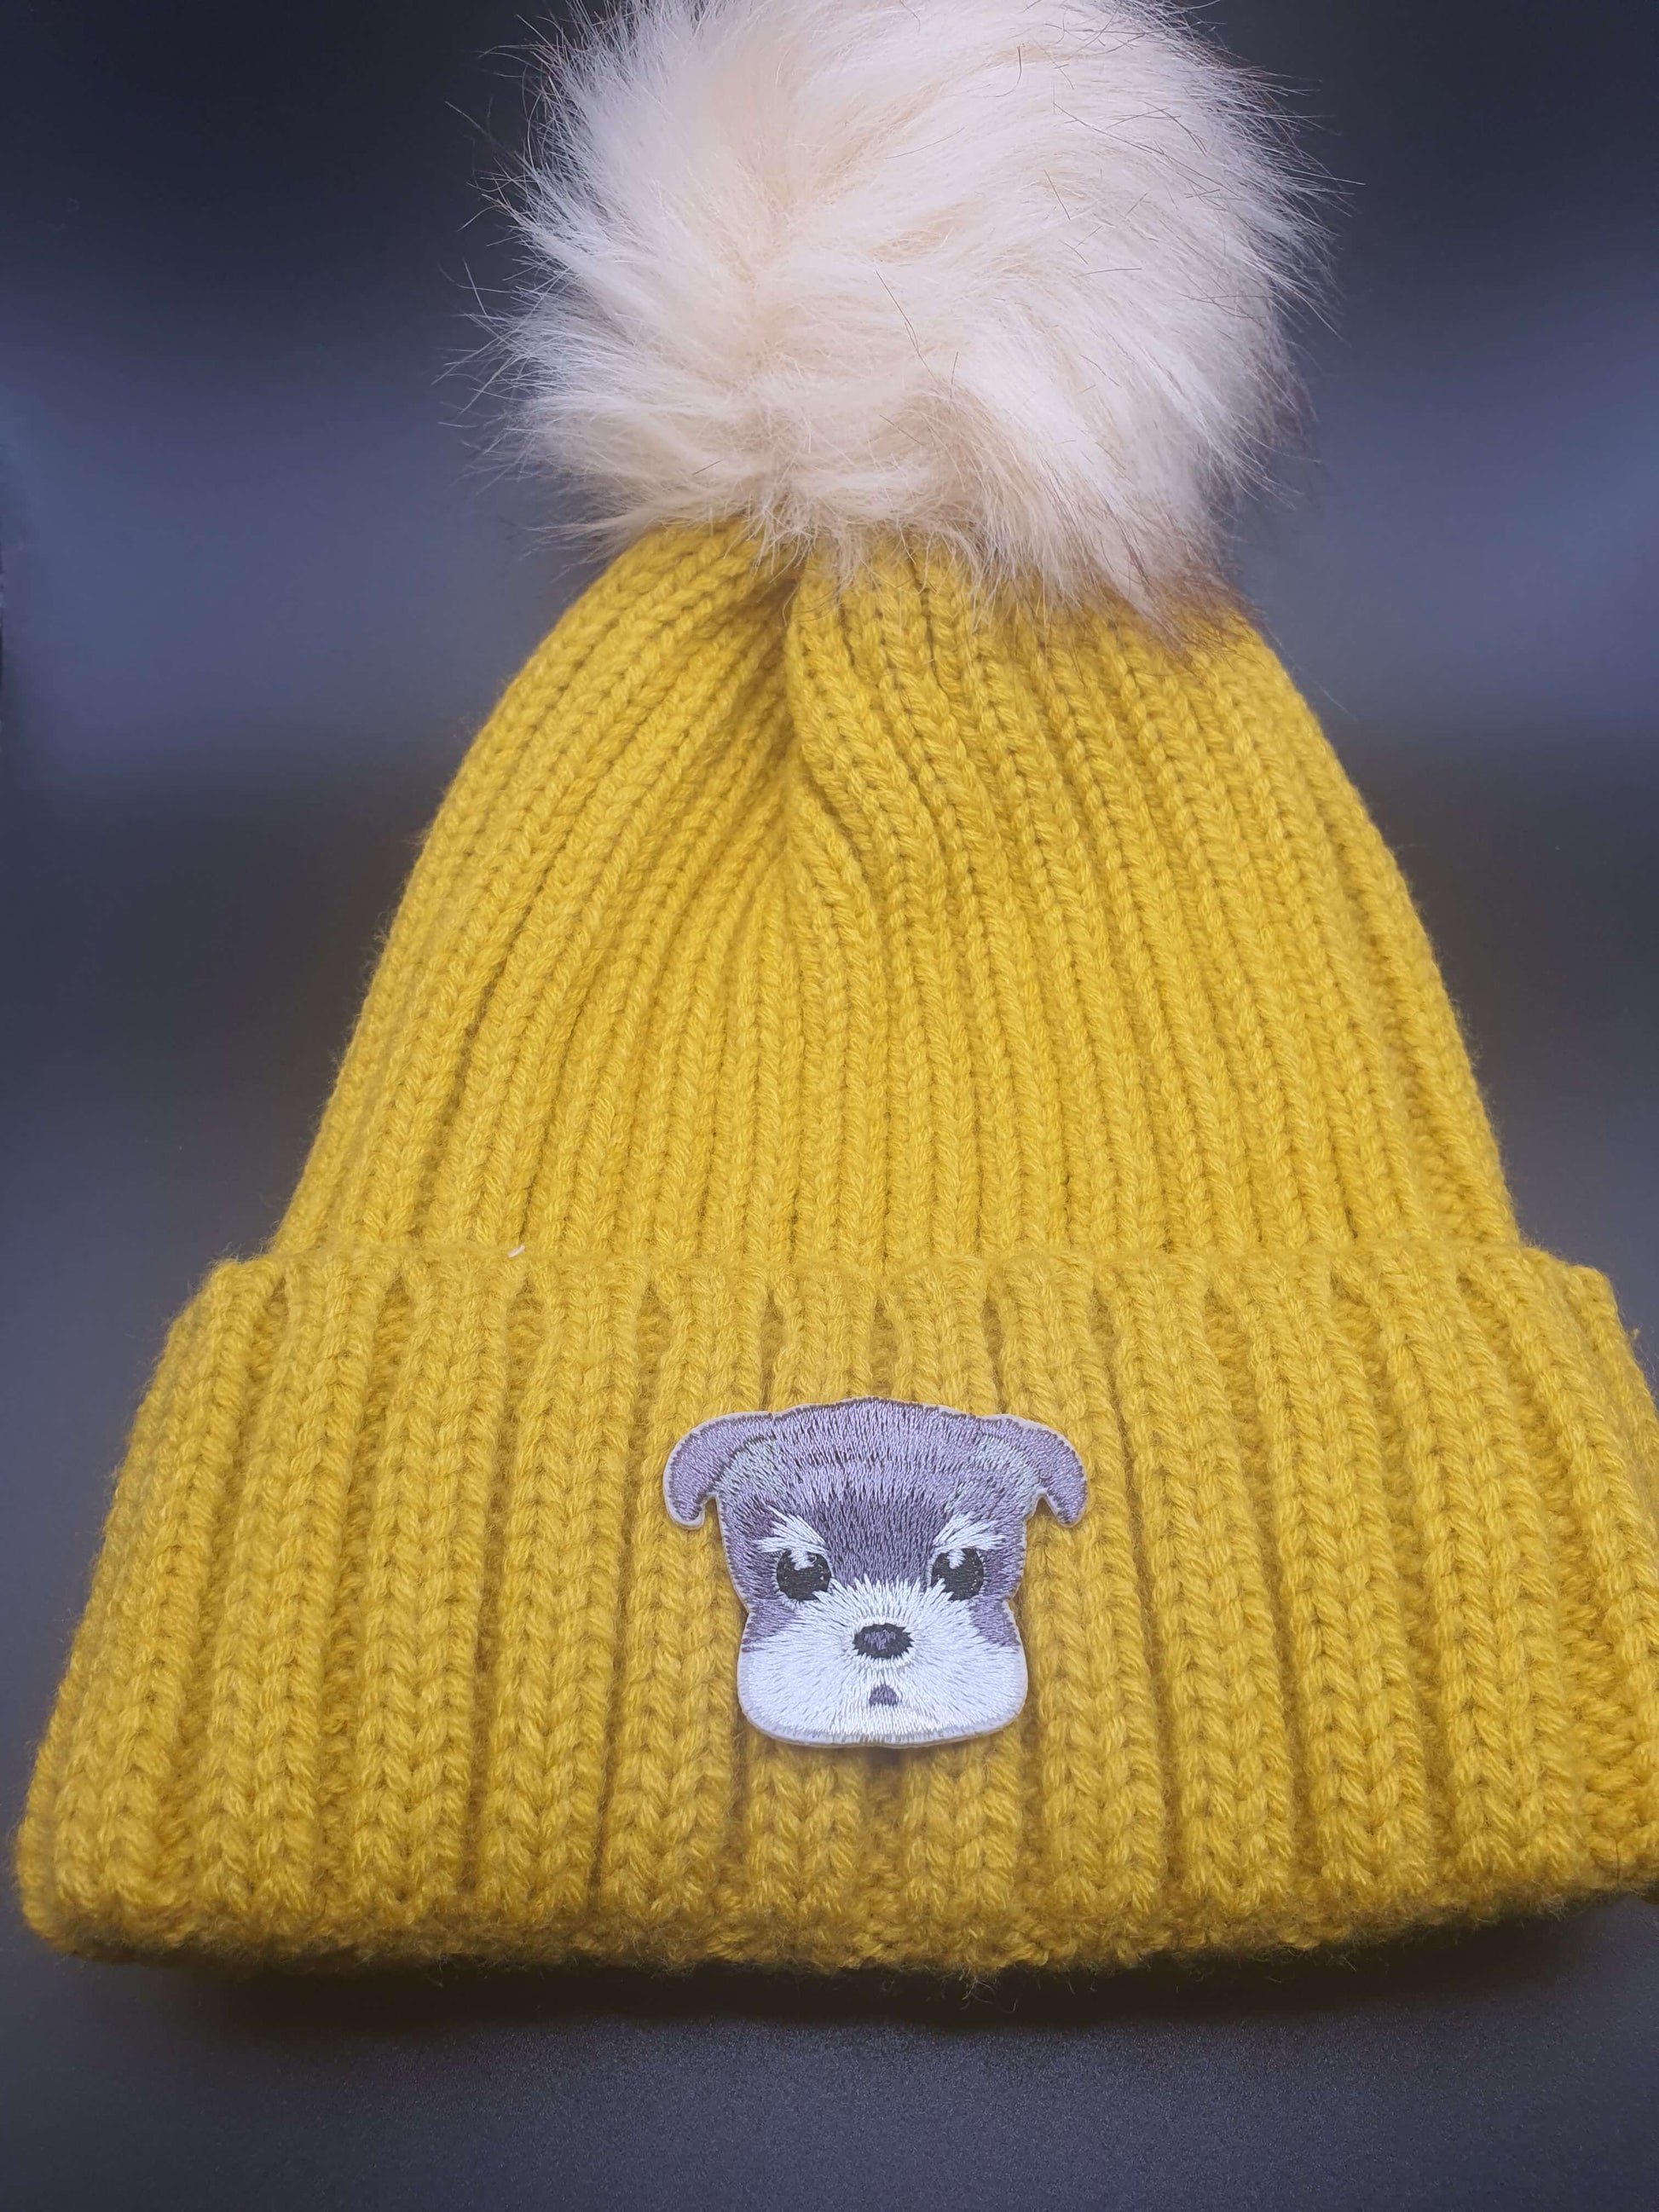 Dog Themed Knitted Beanies - Style's Bug Schnauzer / Yellow